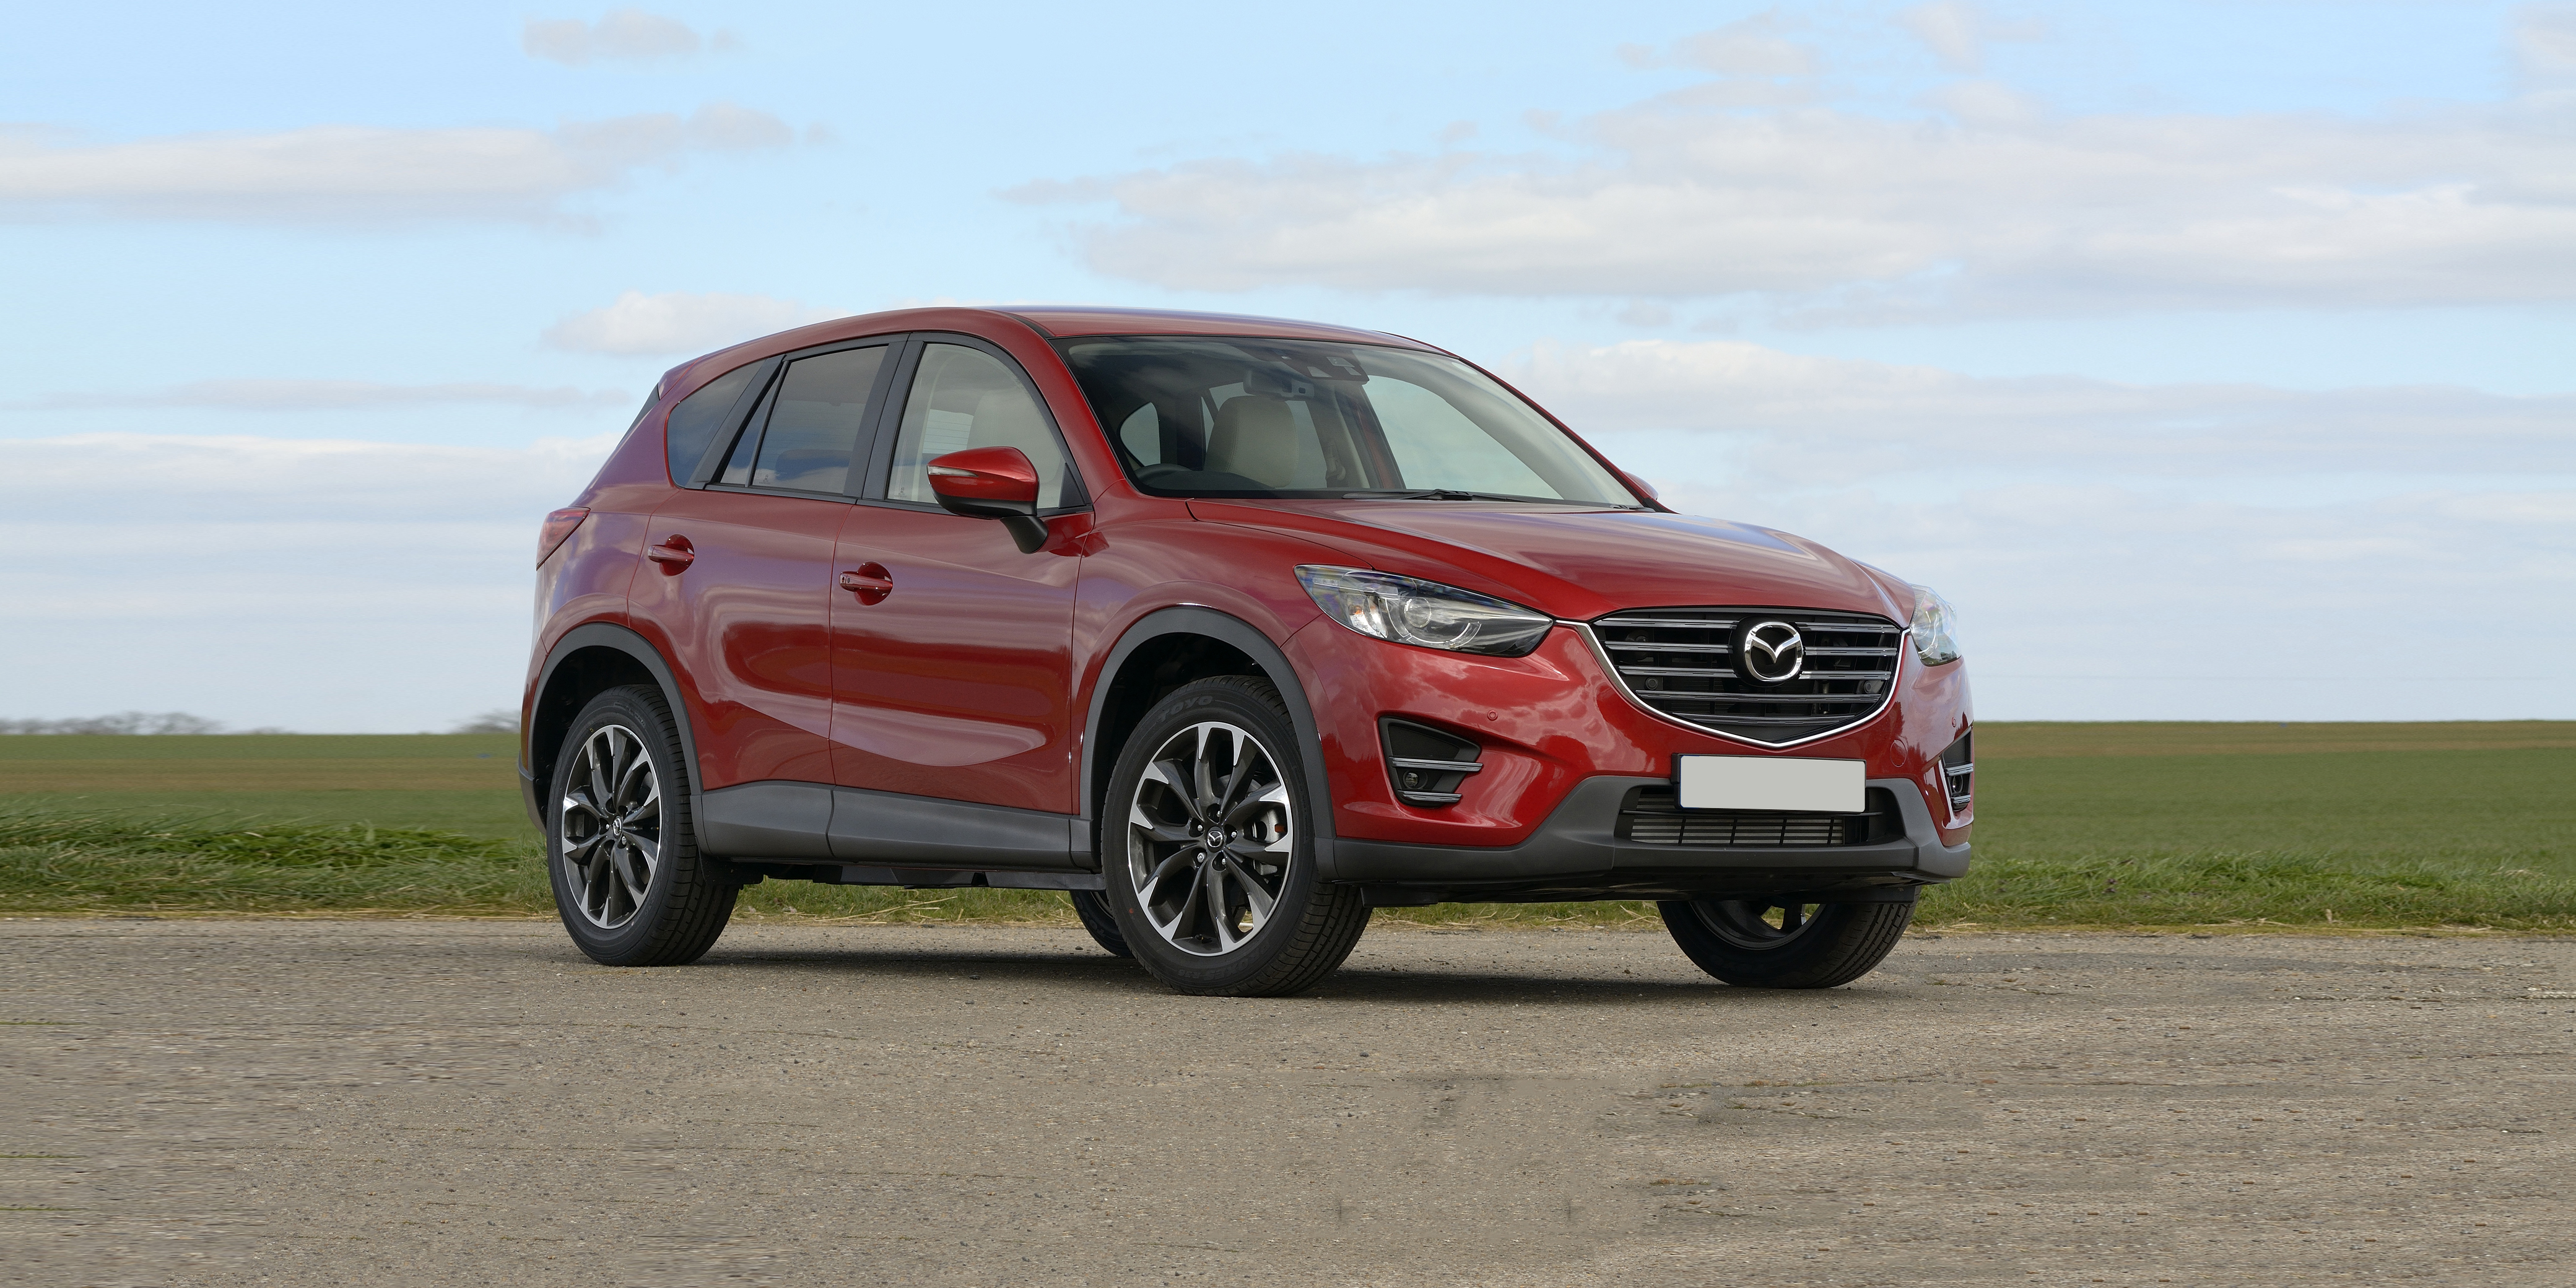 New Mazda CX-5 (2012-2017) Review, Drive, Specs & Pricing